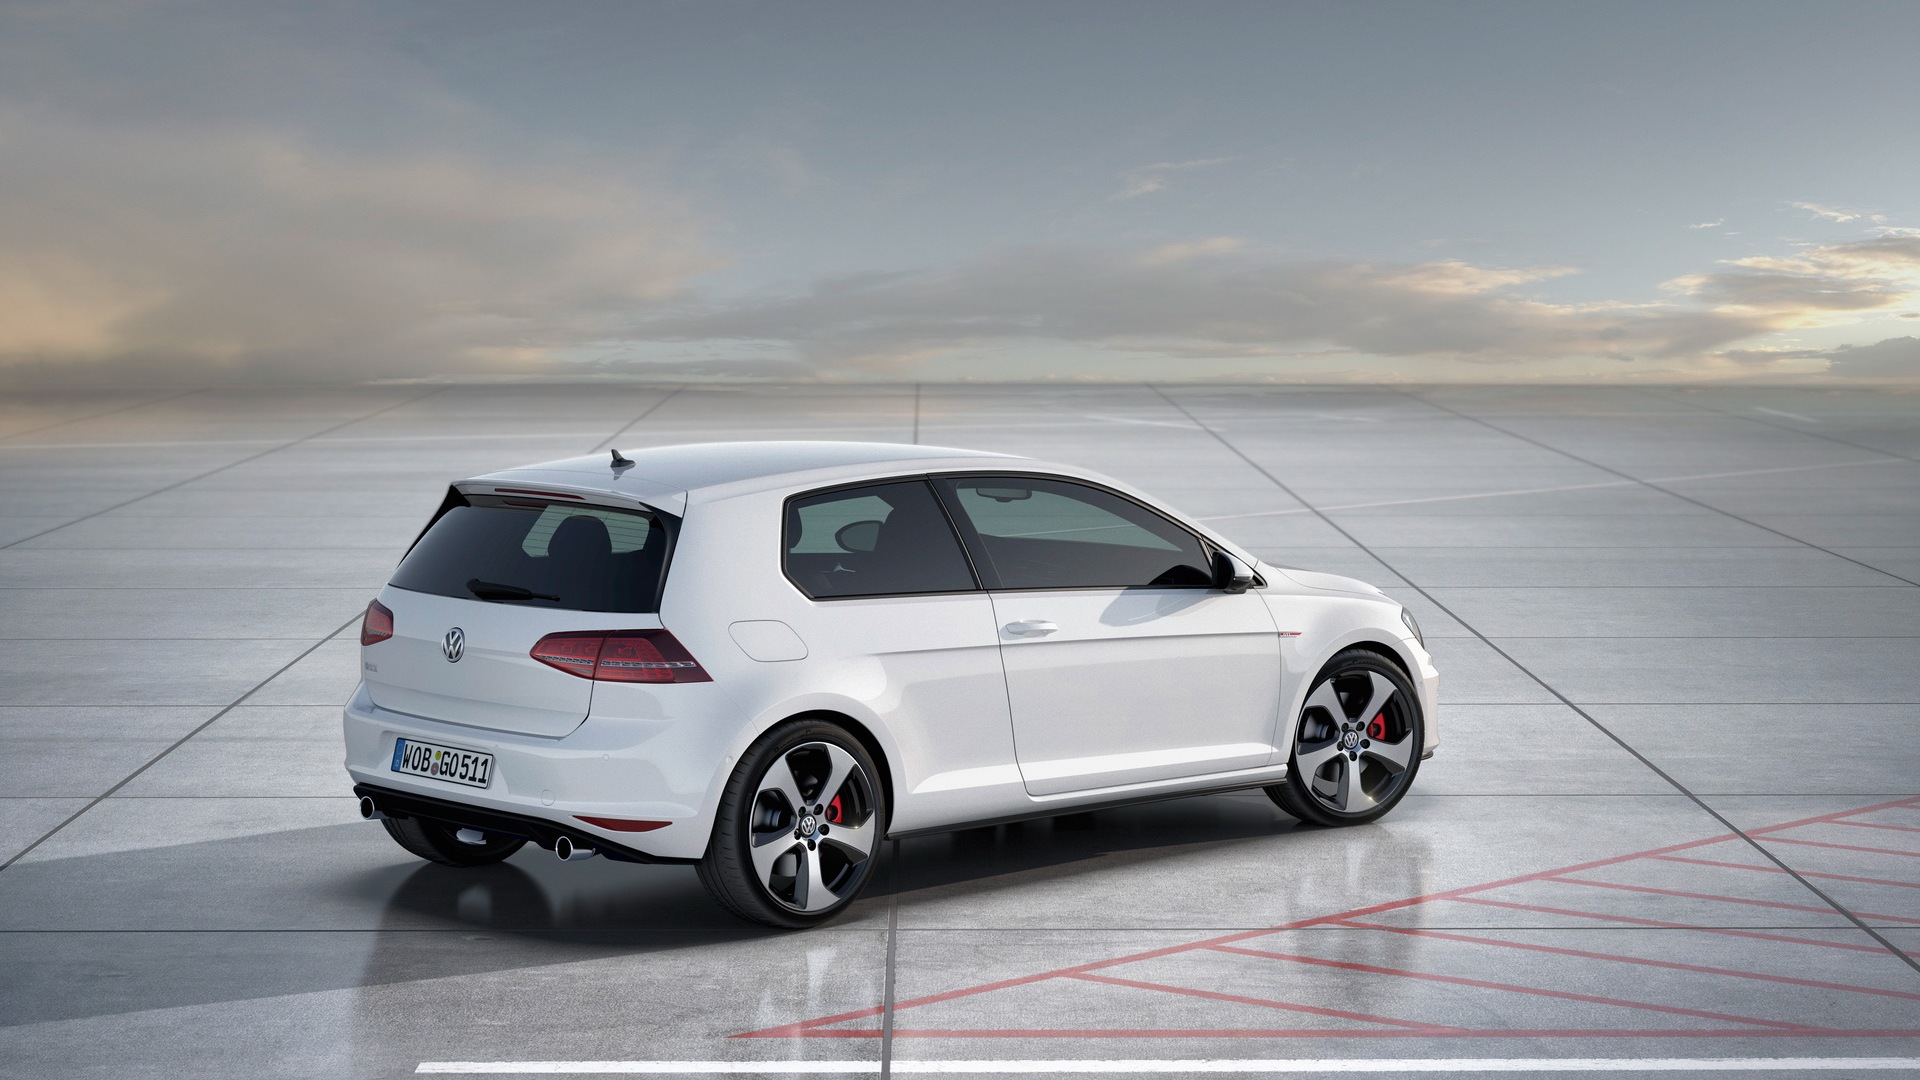 Volkswagen Golf GTI Concept photos and wallpapers tuningnewsnet